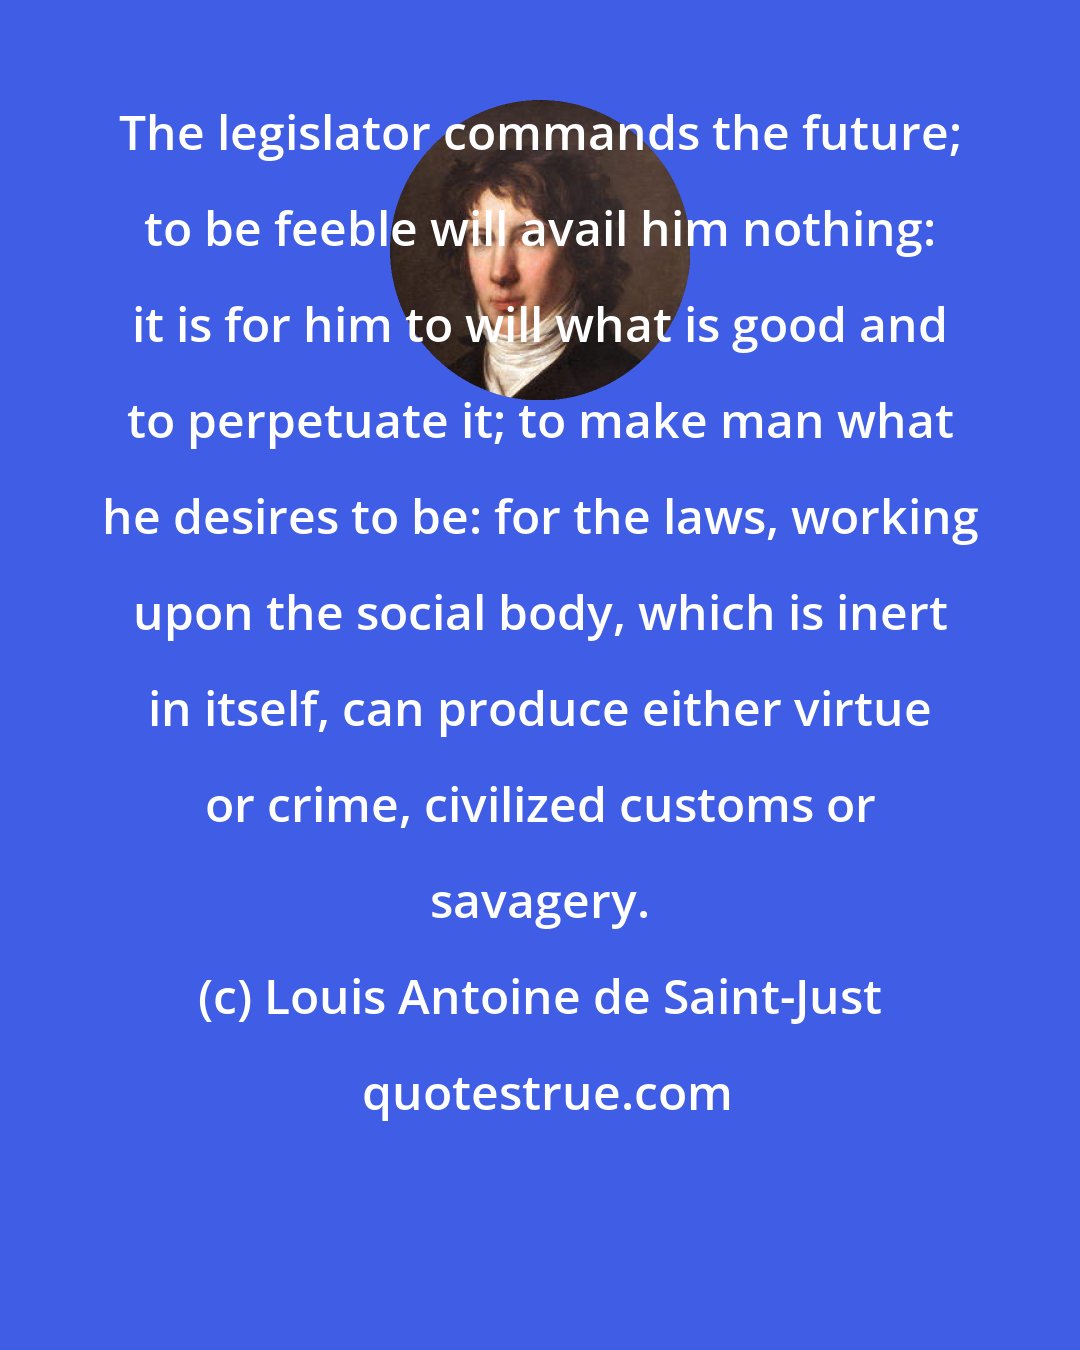 Louis Antoine de Saint-Just: The legislator commands the future; to be feeble will avail him nothing: it is for him to will what is good and to perpetuate it; to make man what he desires to be: for the laws, working upon the social body, which is inert in itself, can produce either virtue or crime, civilized customs or savagery.